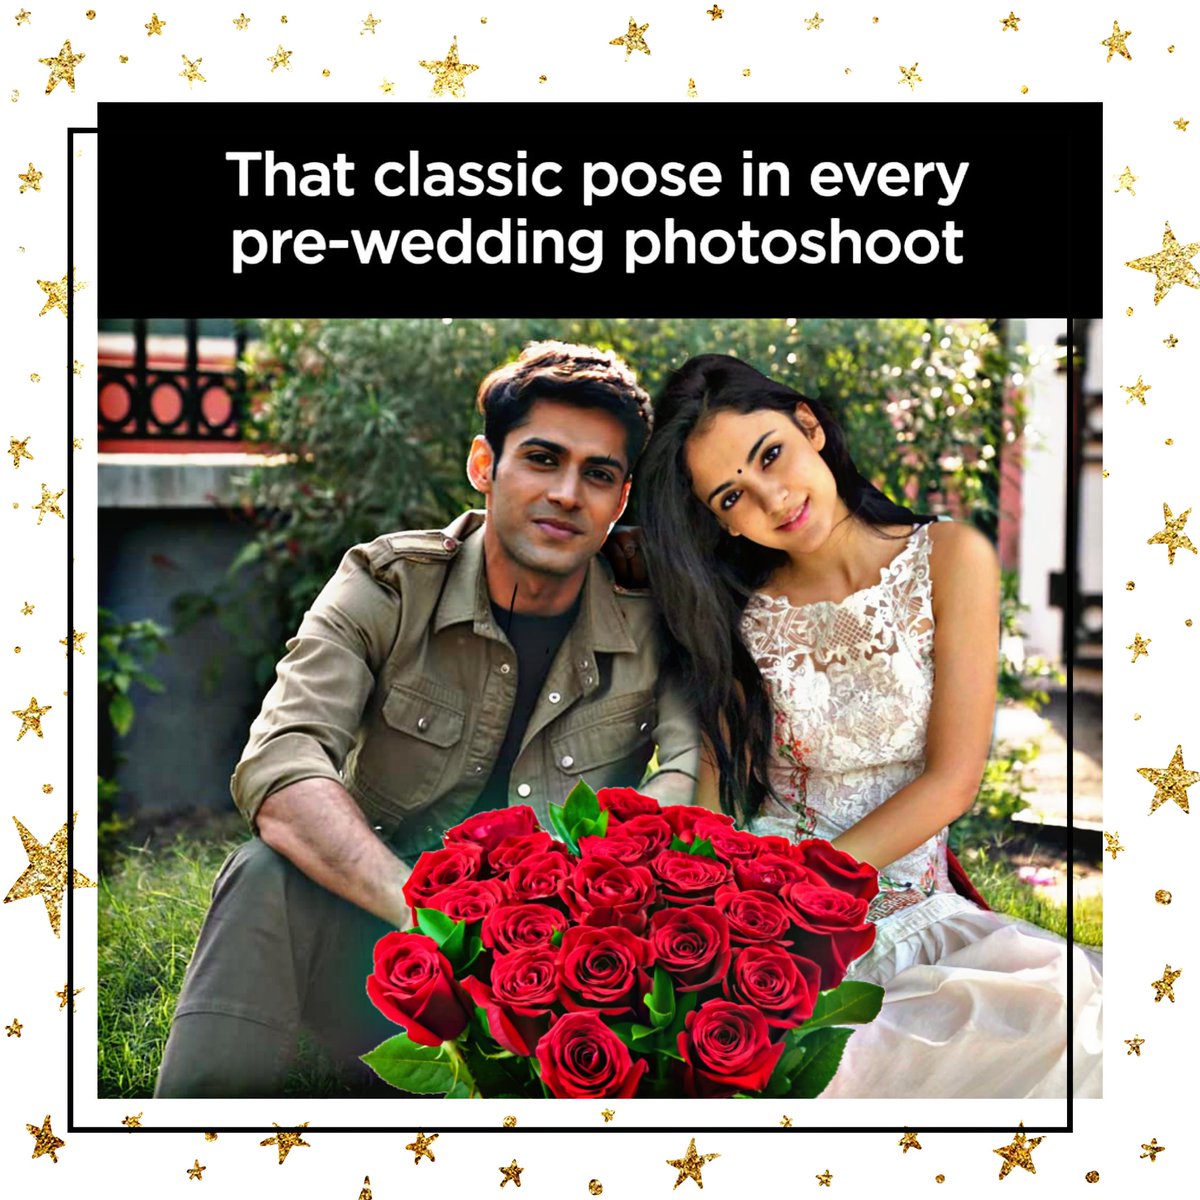 Here are creative ideas for an exotic pre-wedding shoot